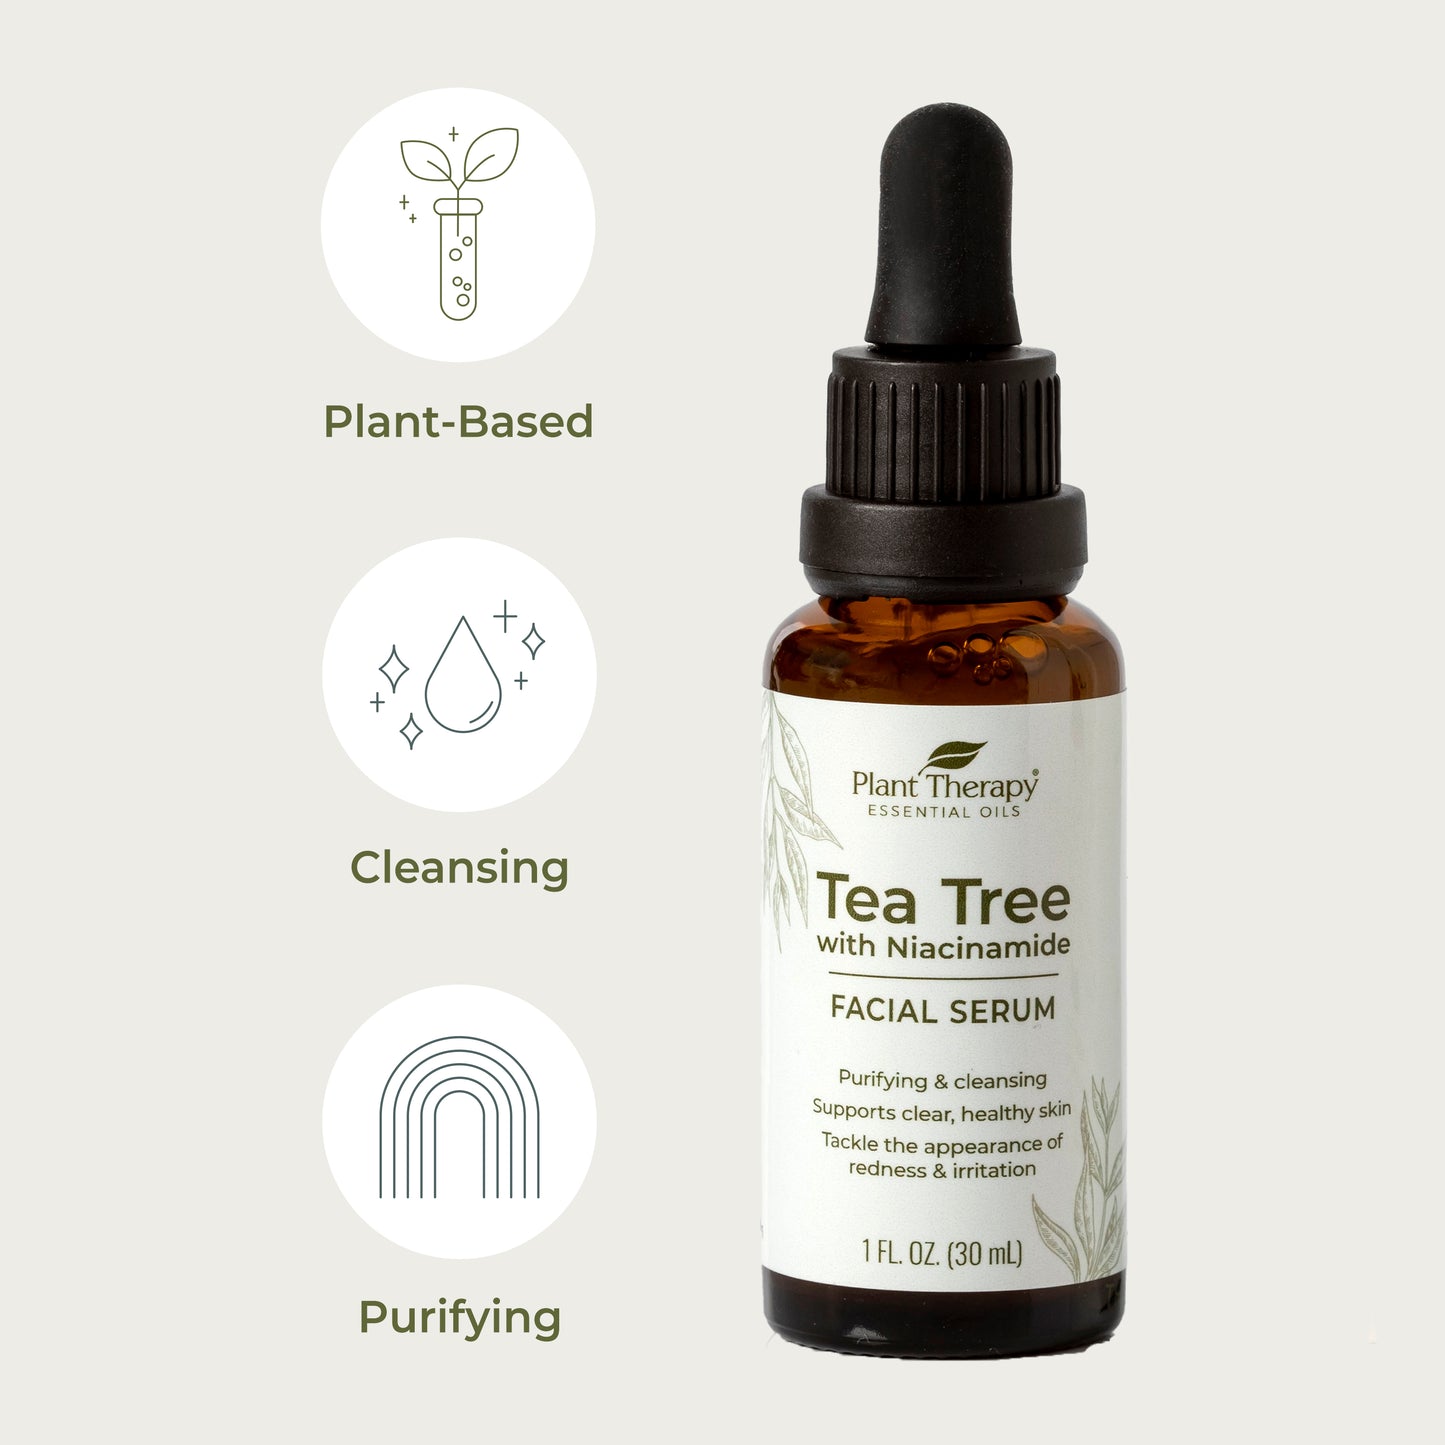 Tea tree facial serum benefits - plant based, cleansing, purifying